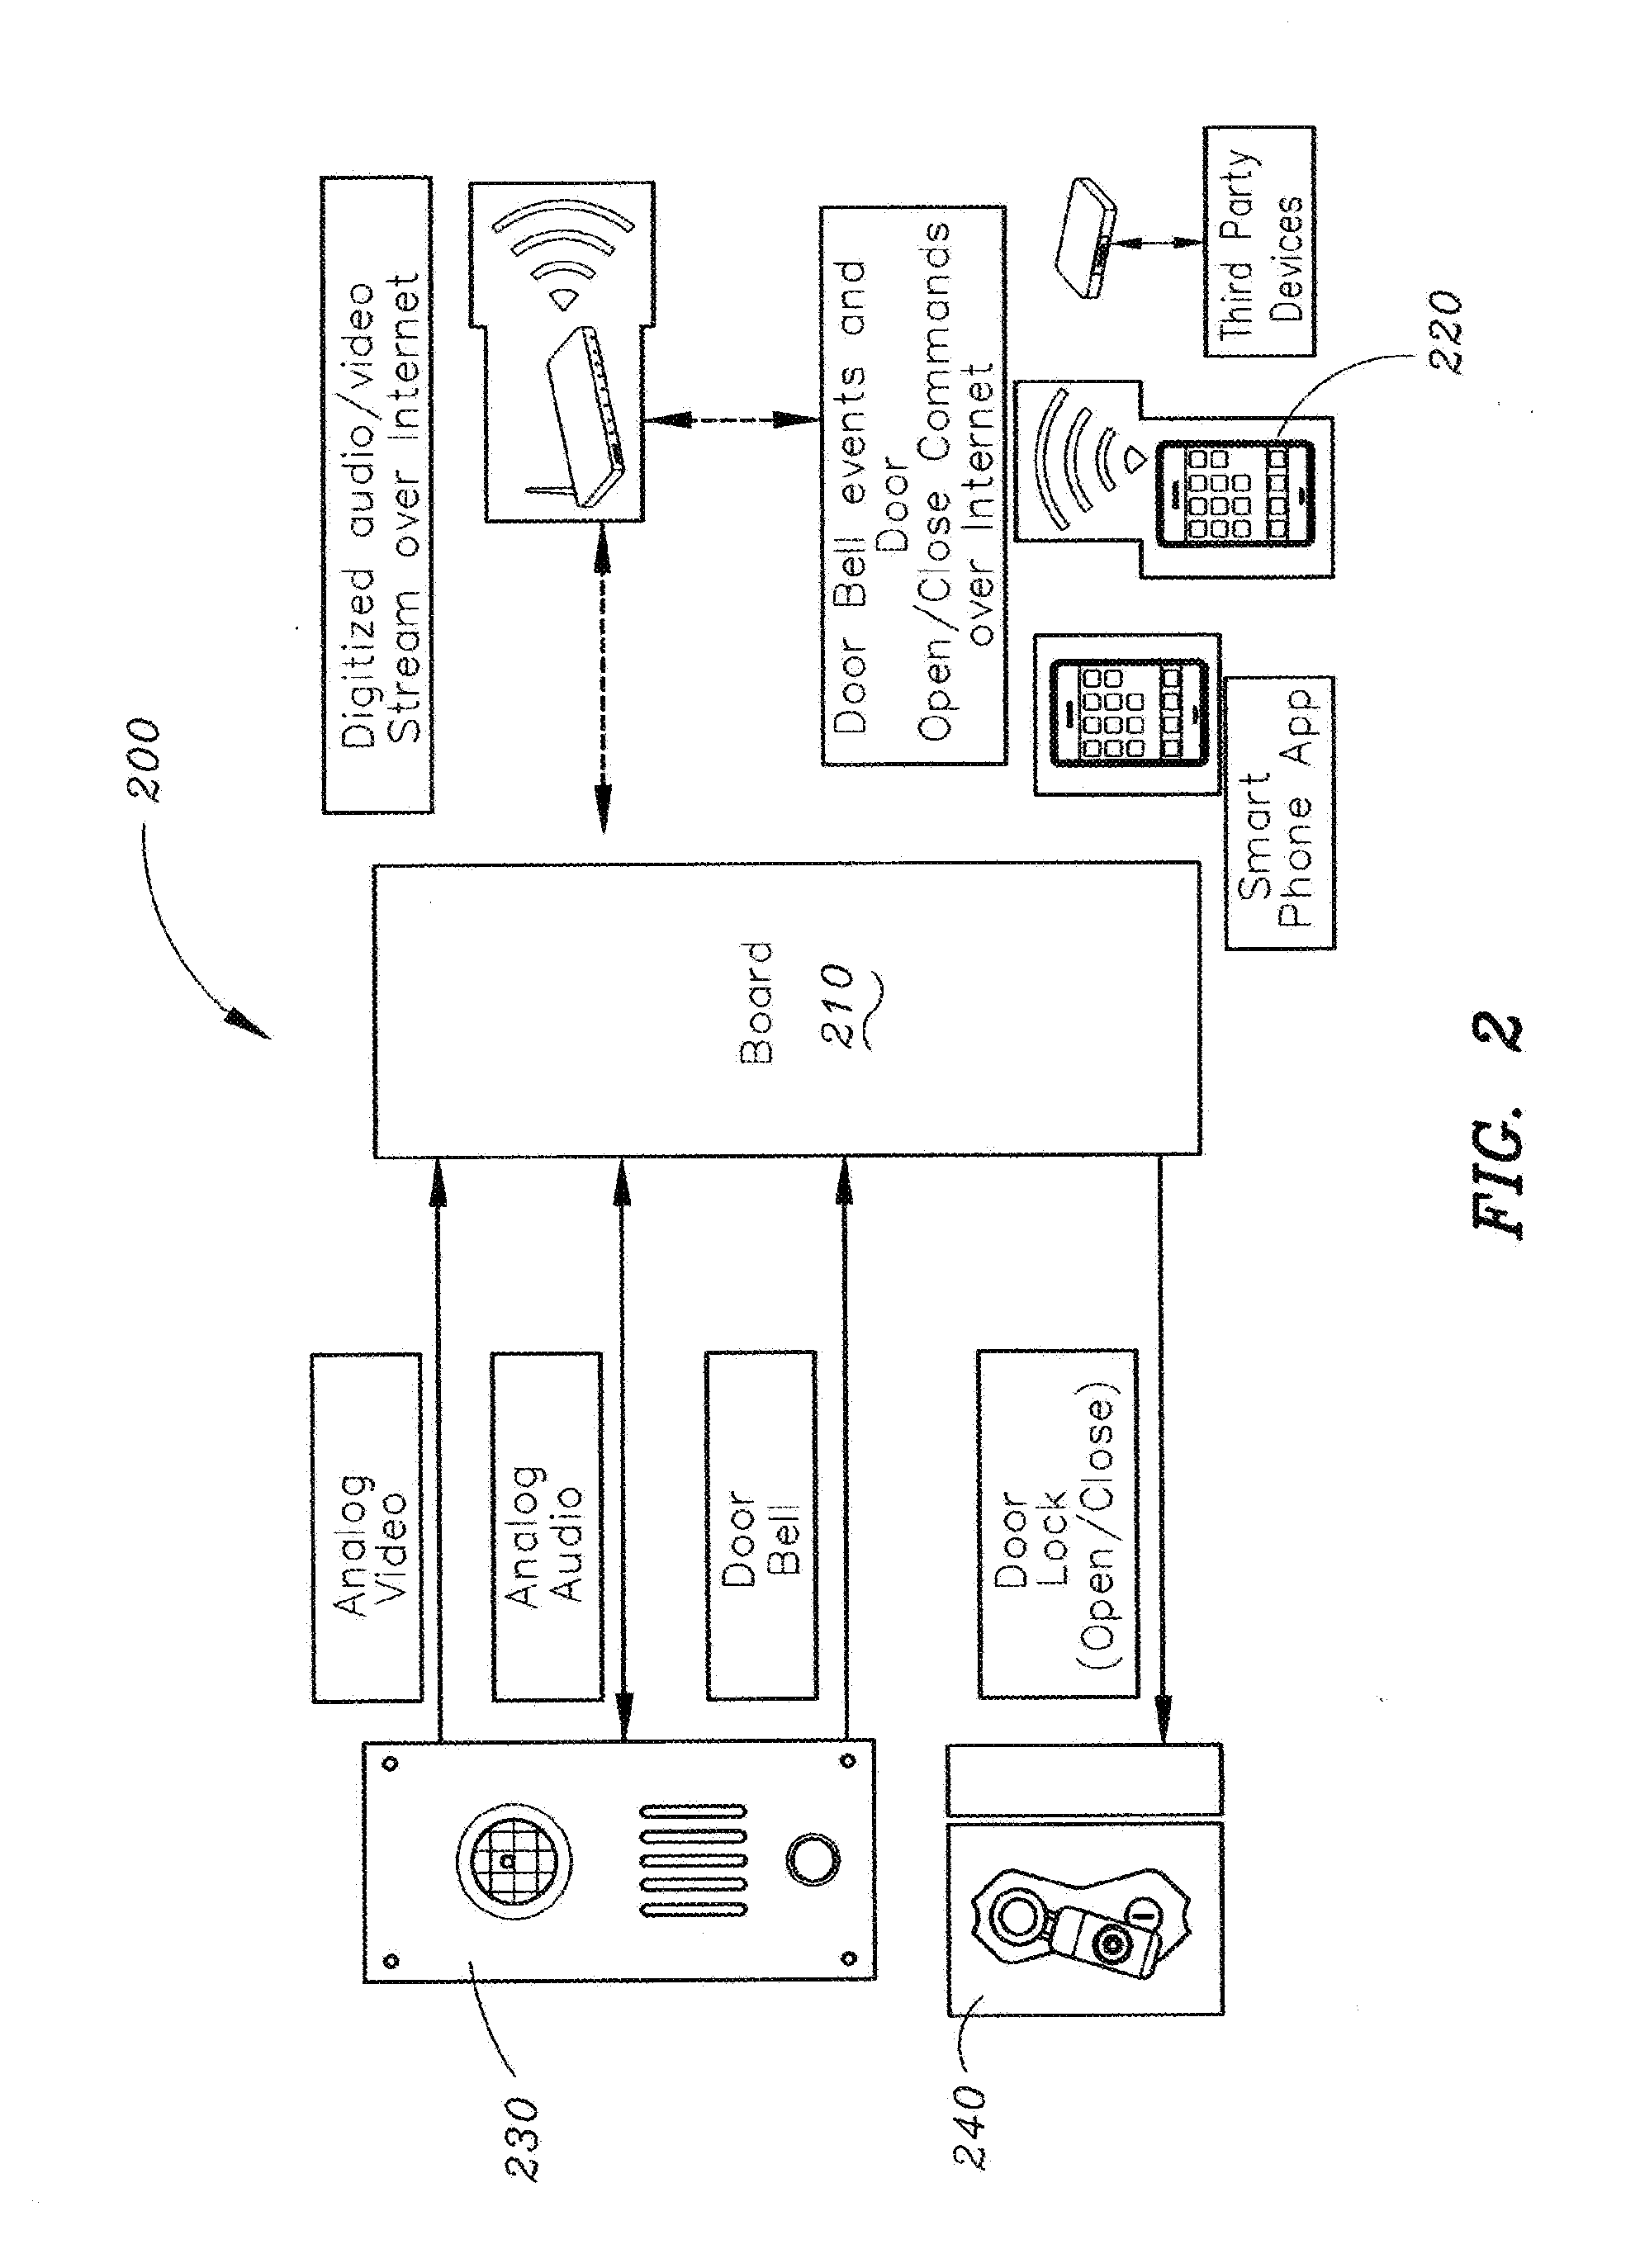 Method and apparatus for unlocking/locking a door and enabling two-way communications with a door security system via a smart phone